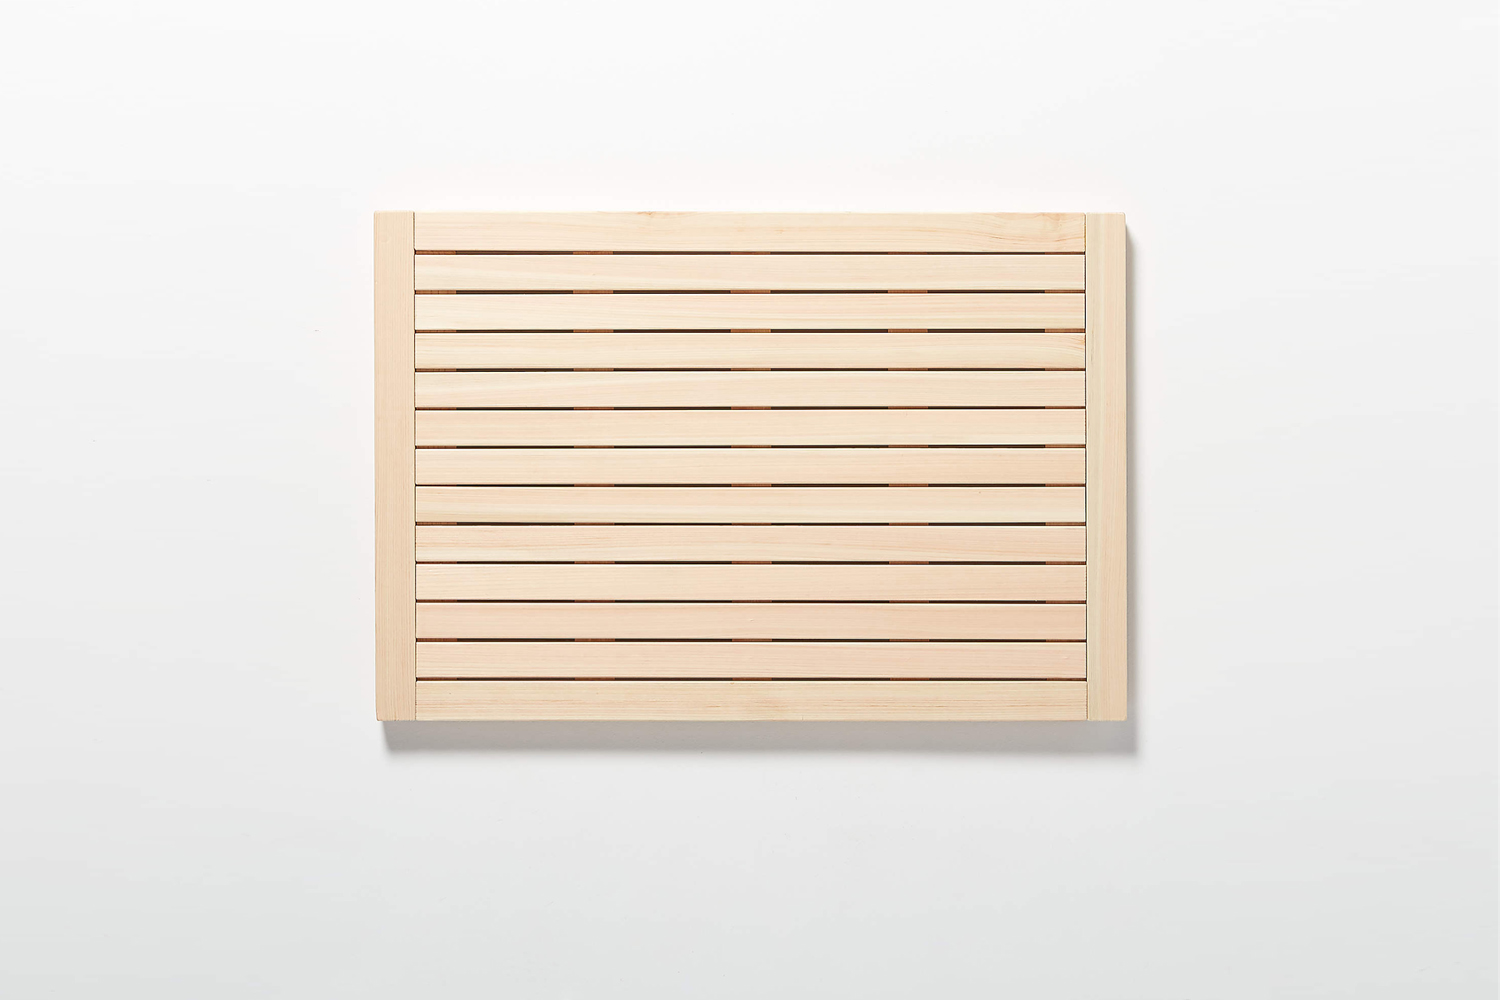 the lateral hinoki wood bath mat from cb2 comes in two sizes: small for $69.9 11